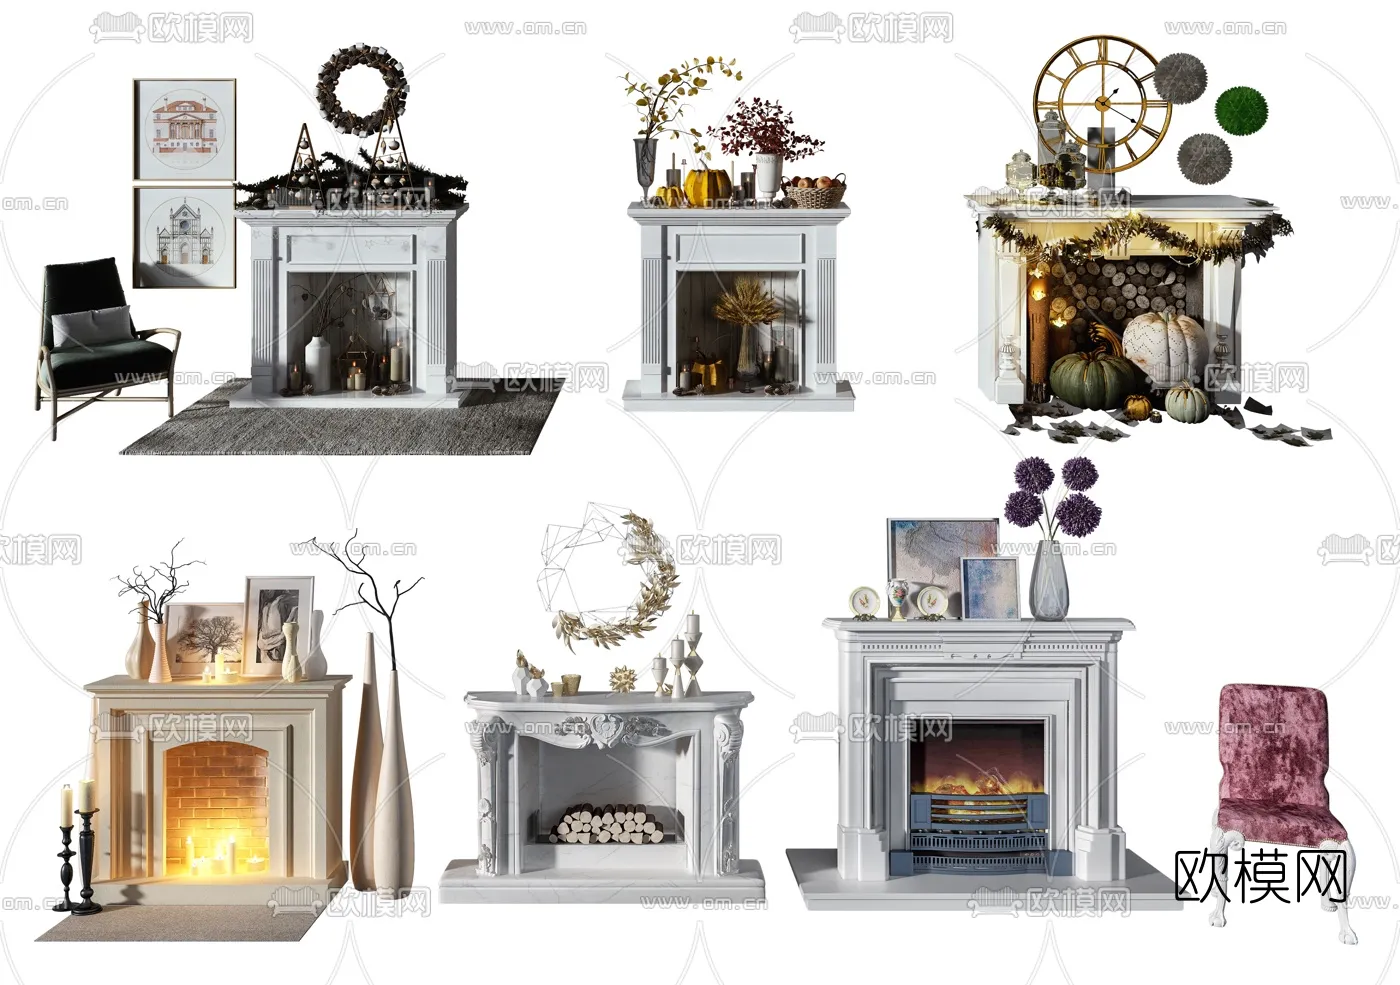 CLASSIC – FIREPLACE 3DMODELS – 021